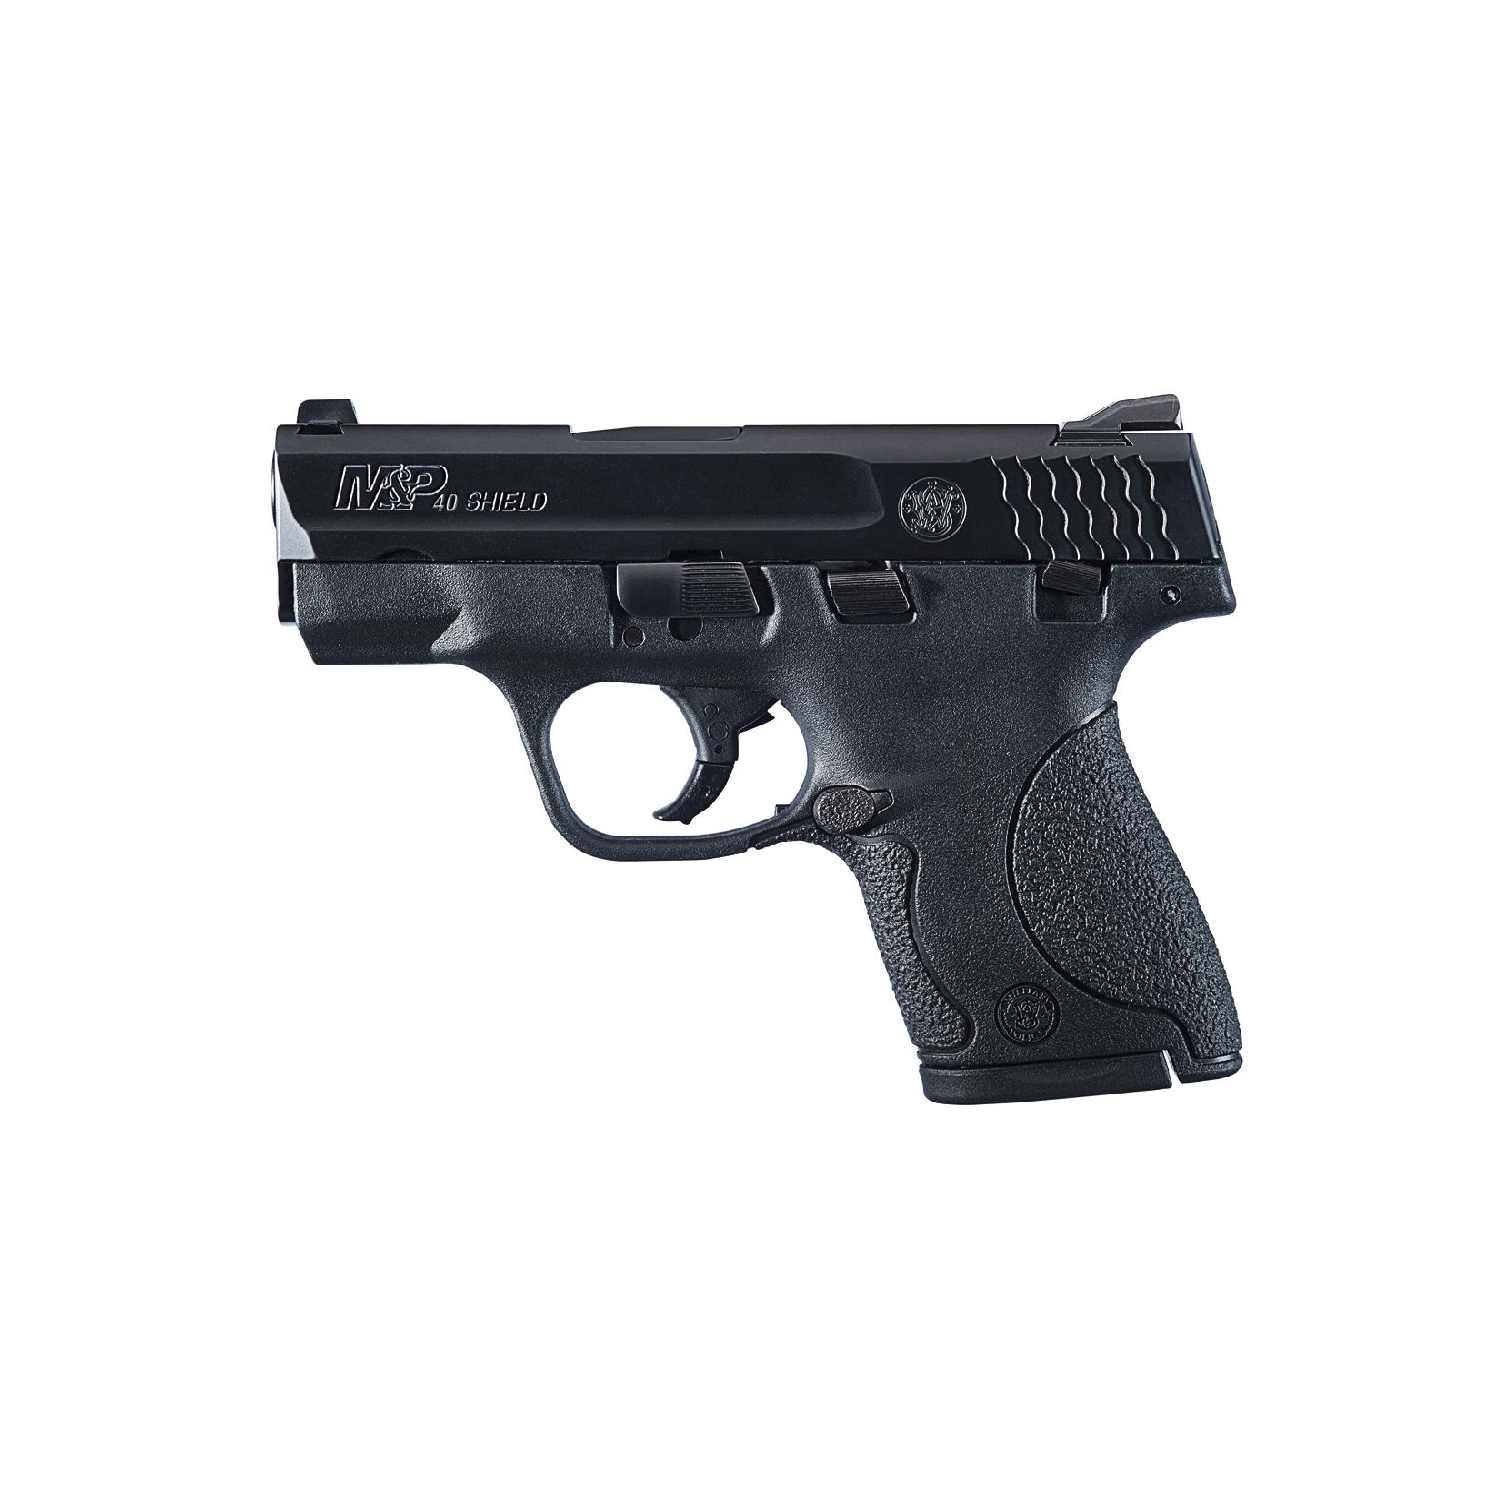 Smith & Wesson M&P Shield 2.0 9 mm Luger